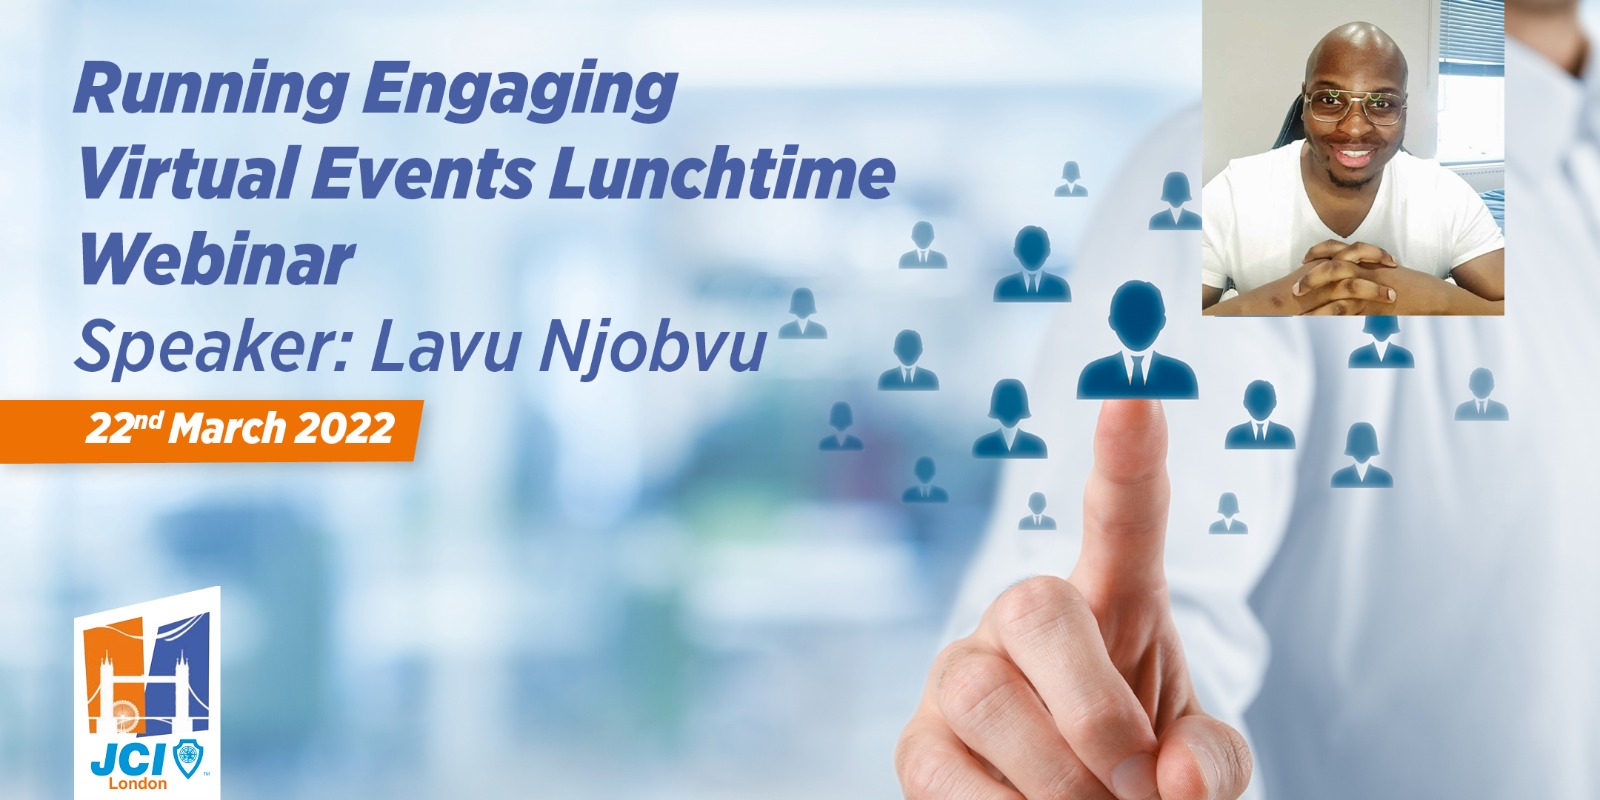 Running Engaging Virtual Events Lunchtime Webinar